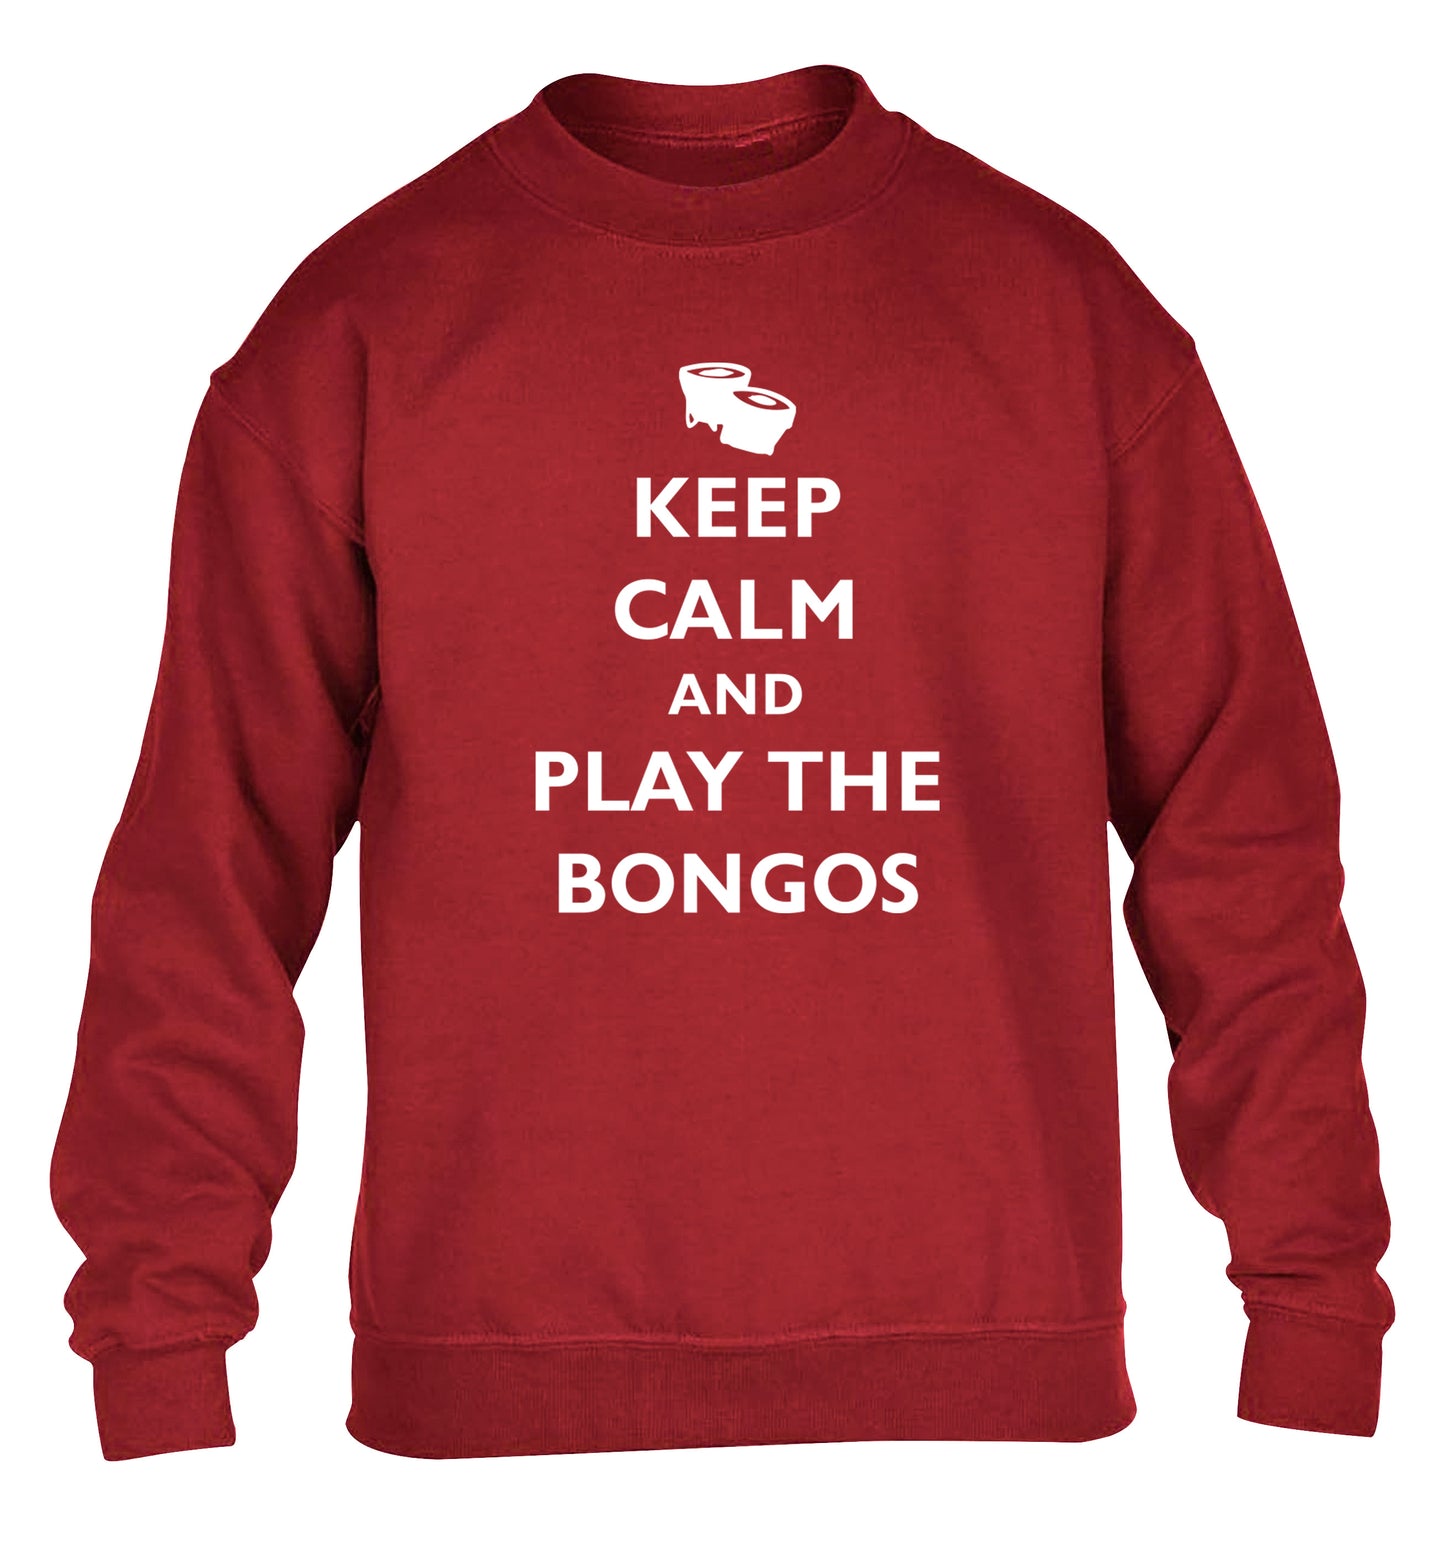 Keep calm and play the bongos children's grey sweater 12-14 Years